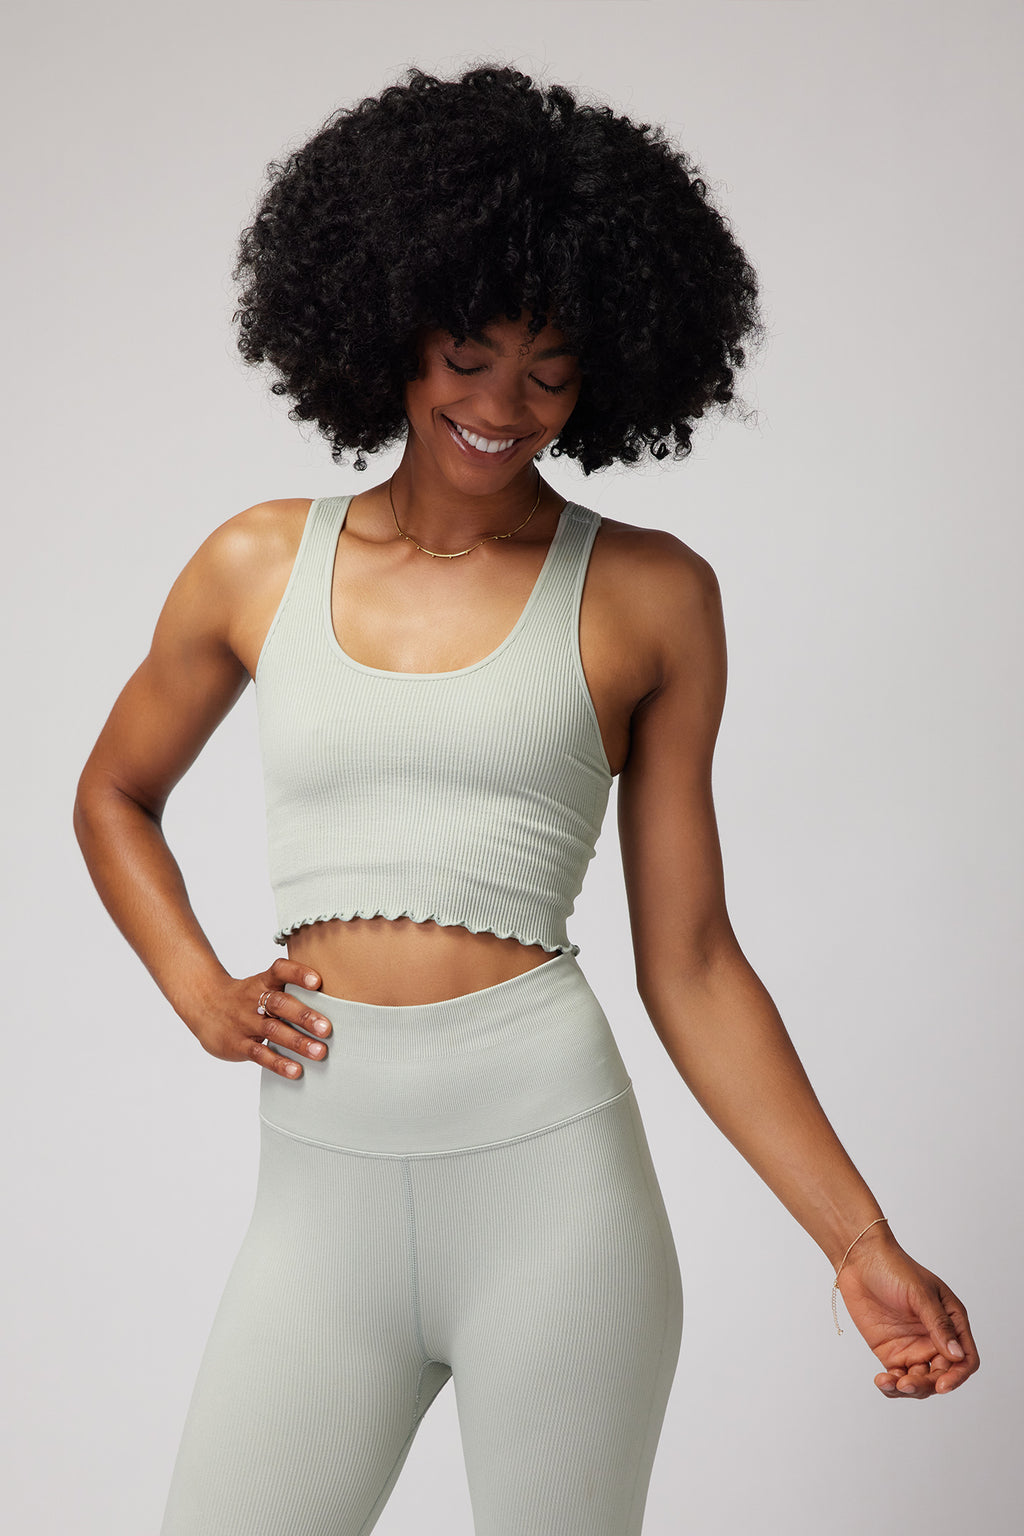 SALE: Women's Athleisure Clothing | Sweaters, Tanks & Bottoms Sale ...